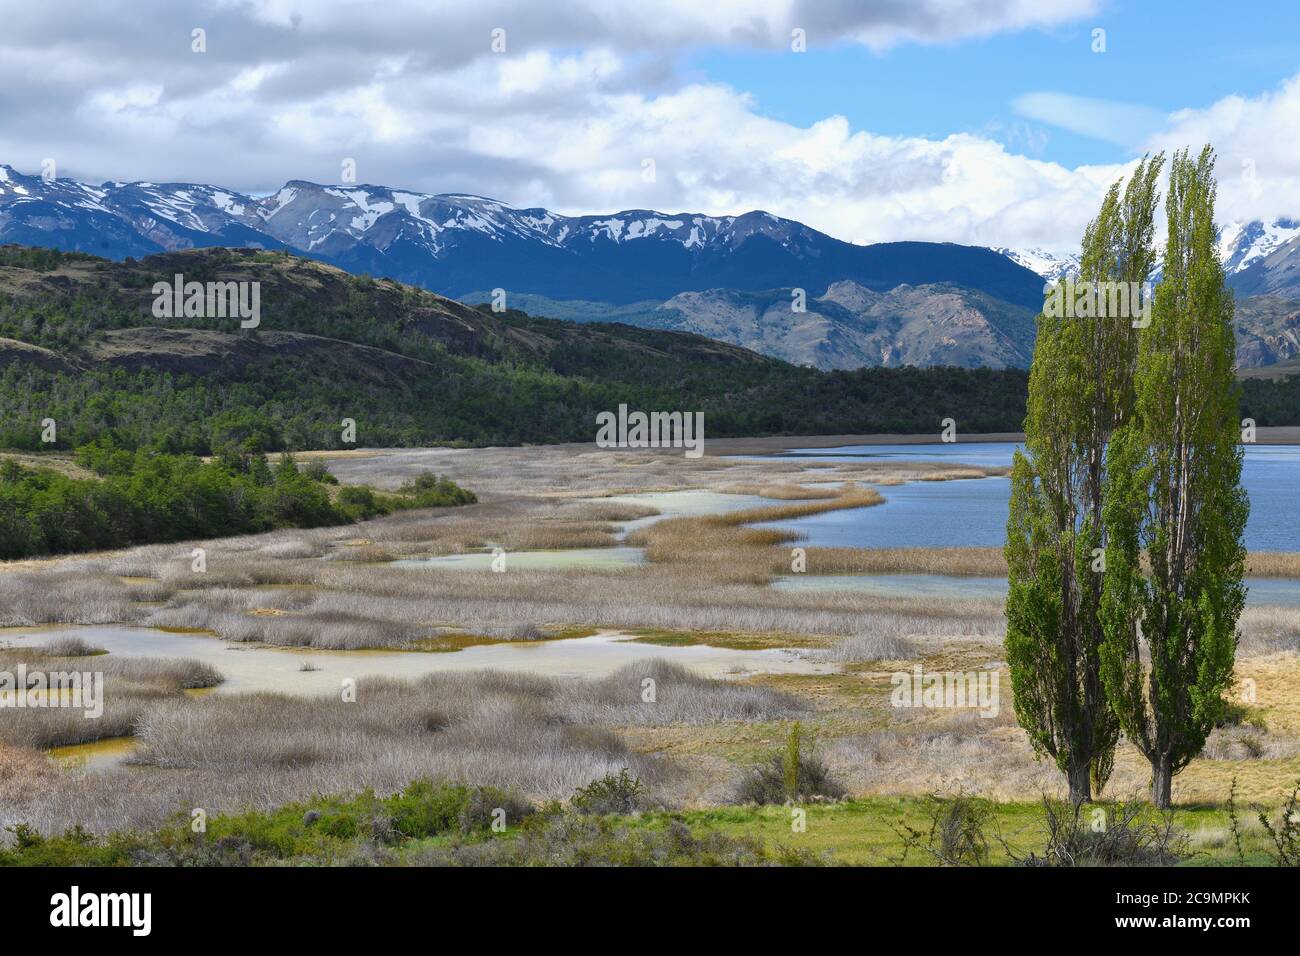 Poplar trees in front of the Andes, Patagonia National Park, Chacabuco valley near Cochrane, Aysen Region, Patagonia, Chile Stock Photo